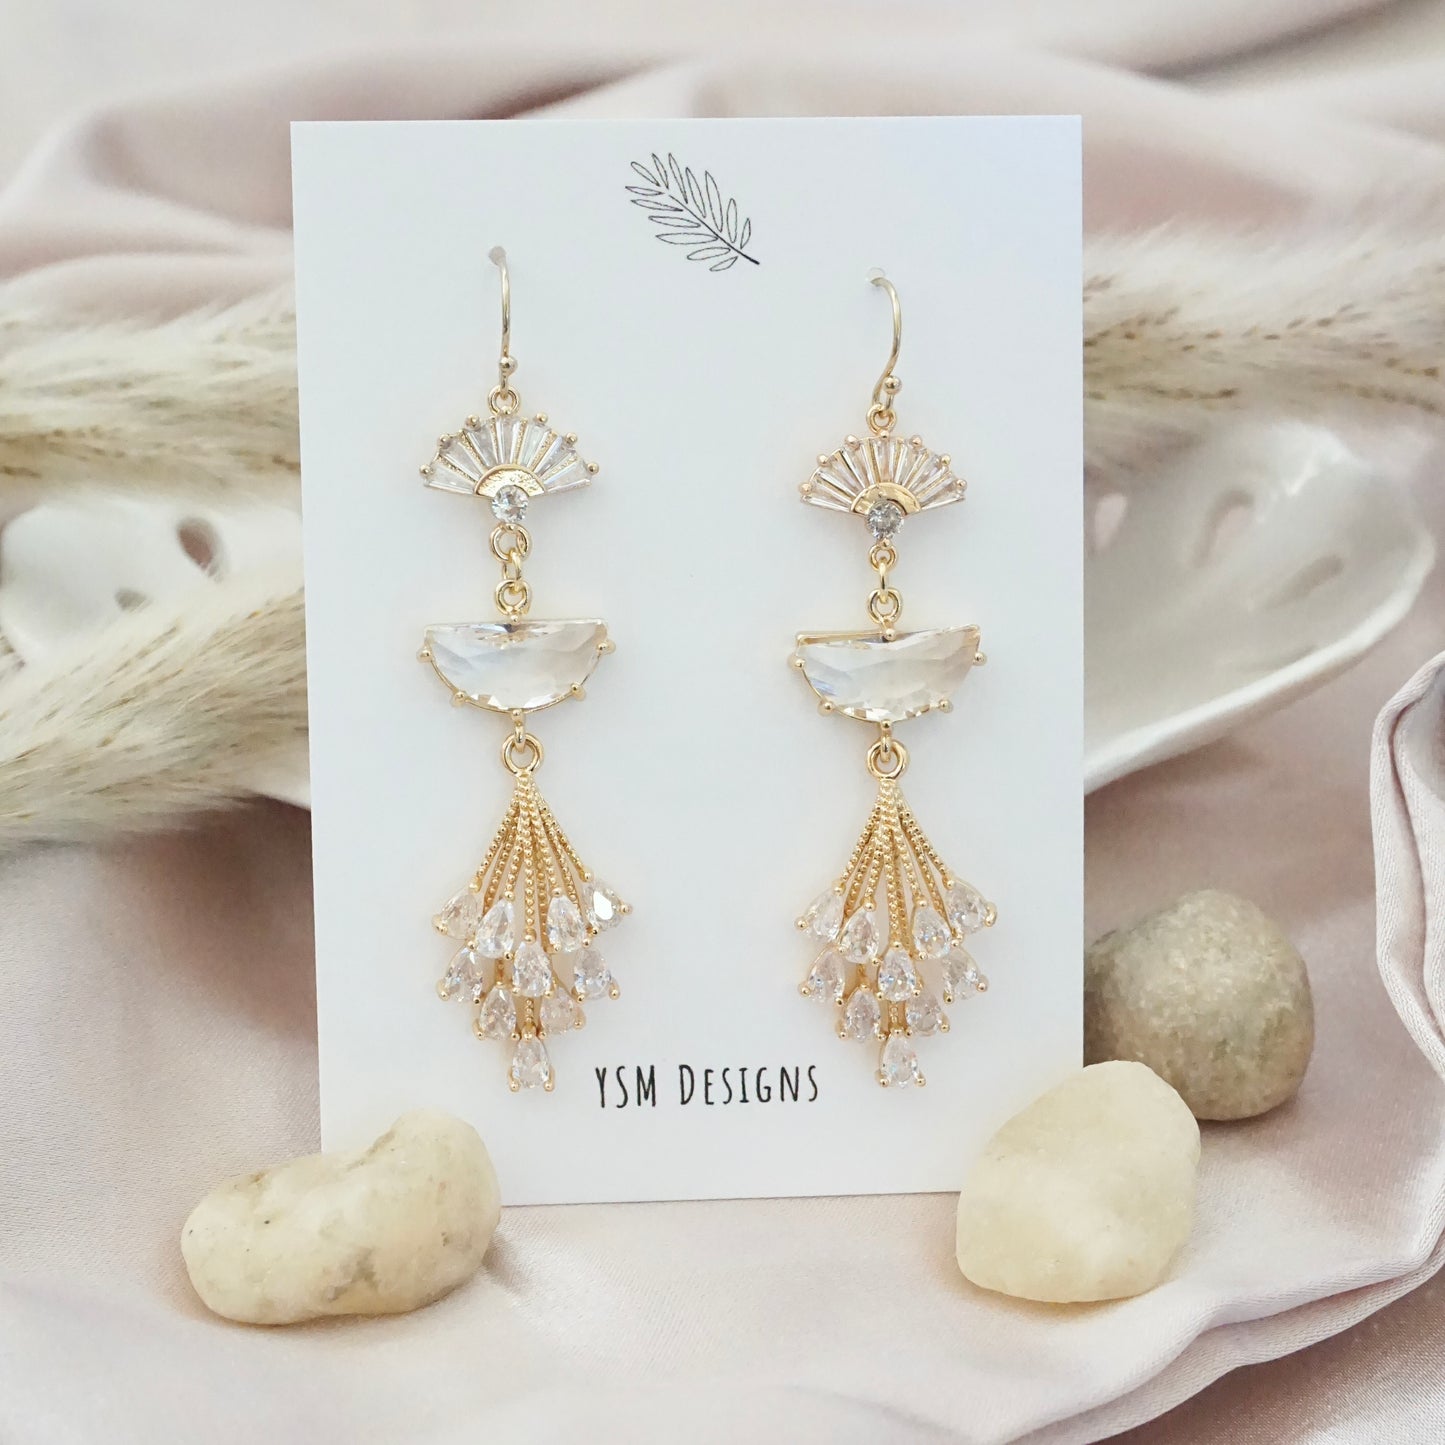 Gold earrings featuring a cubic zirconia fan shaped crystals finished with snowdrop flower inspired crystal piece.